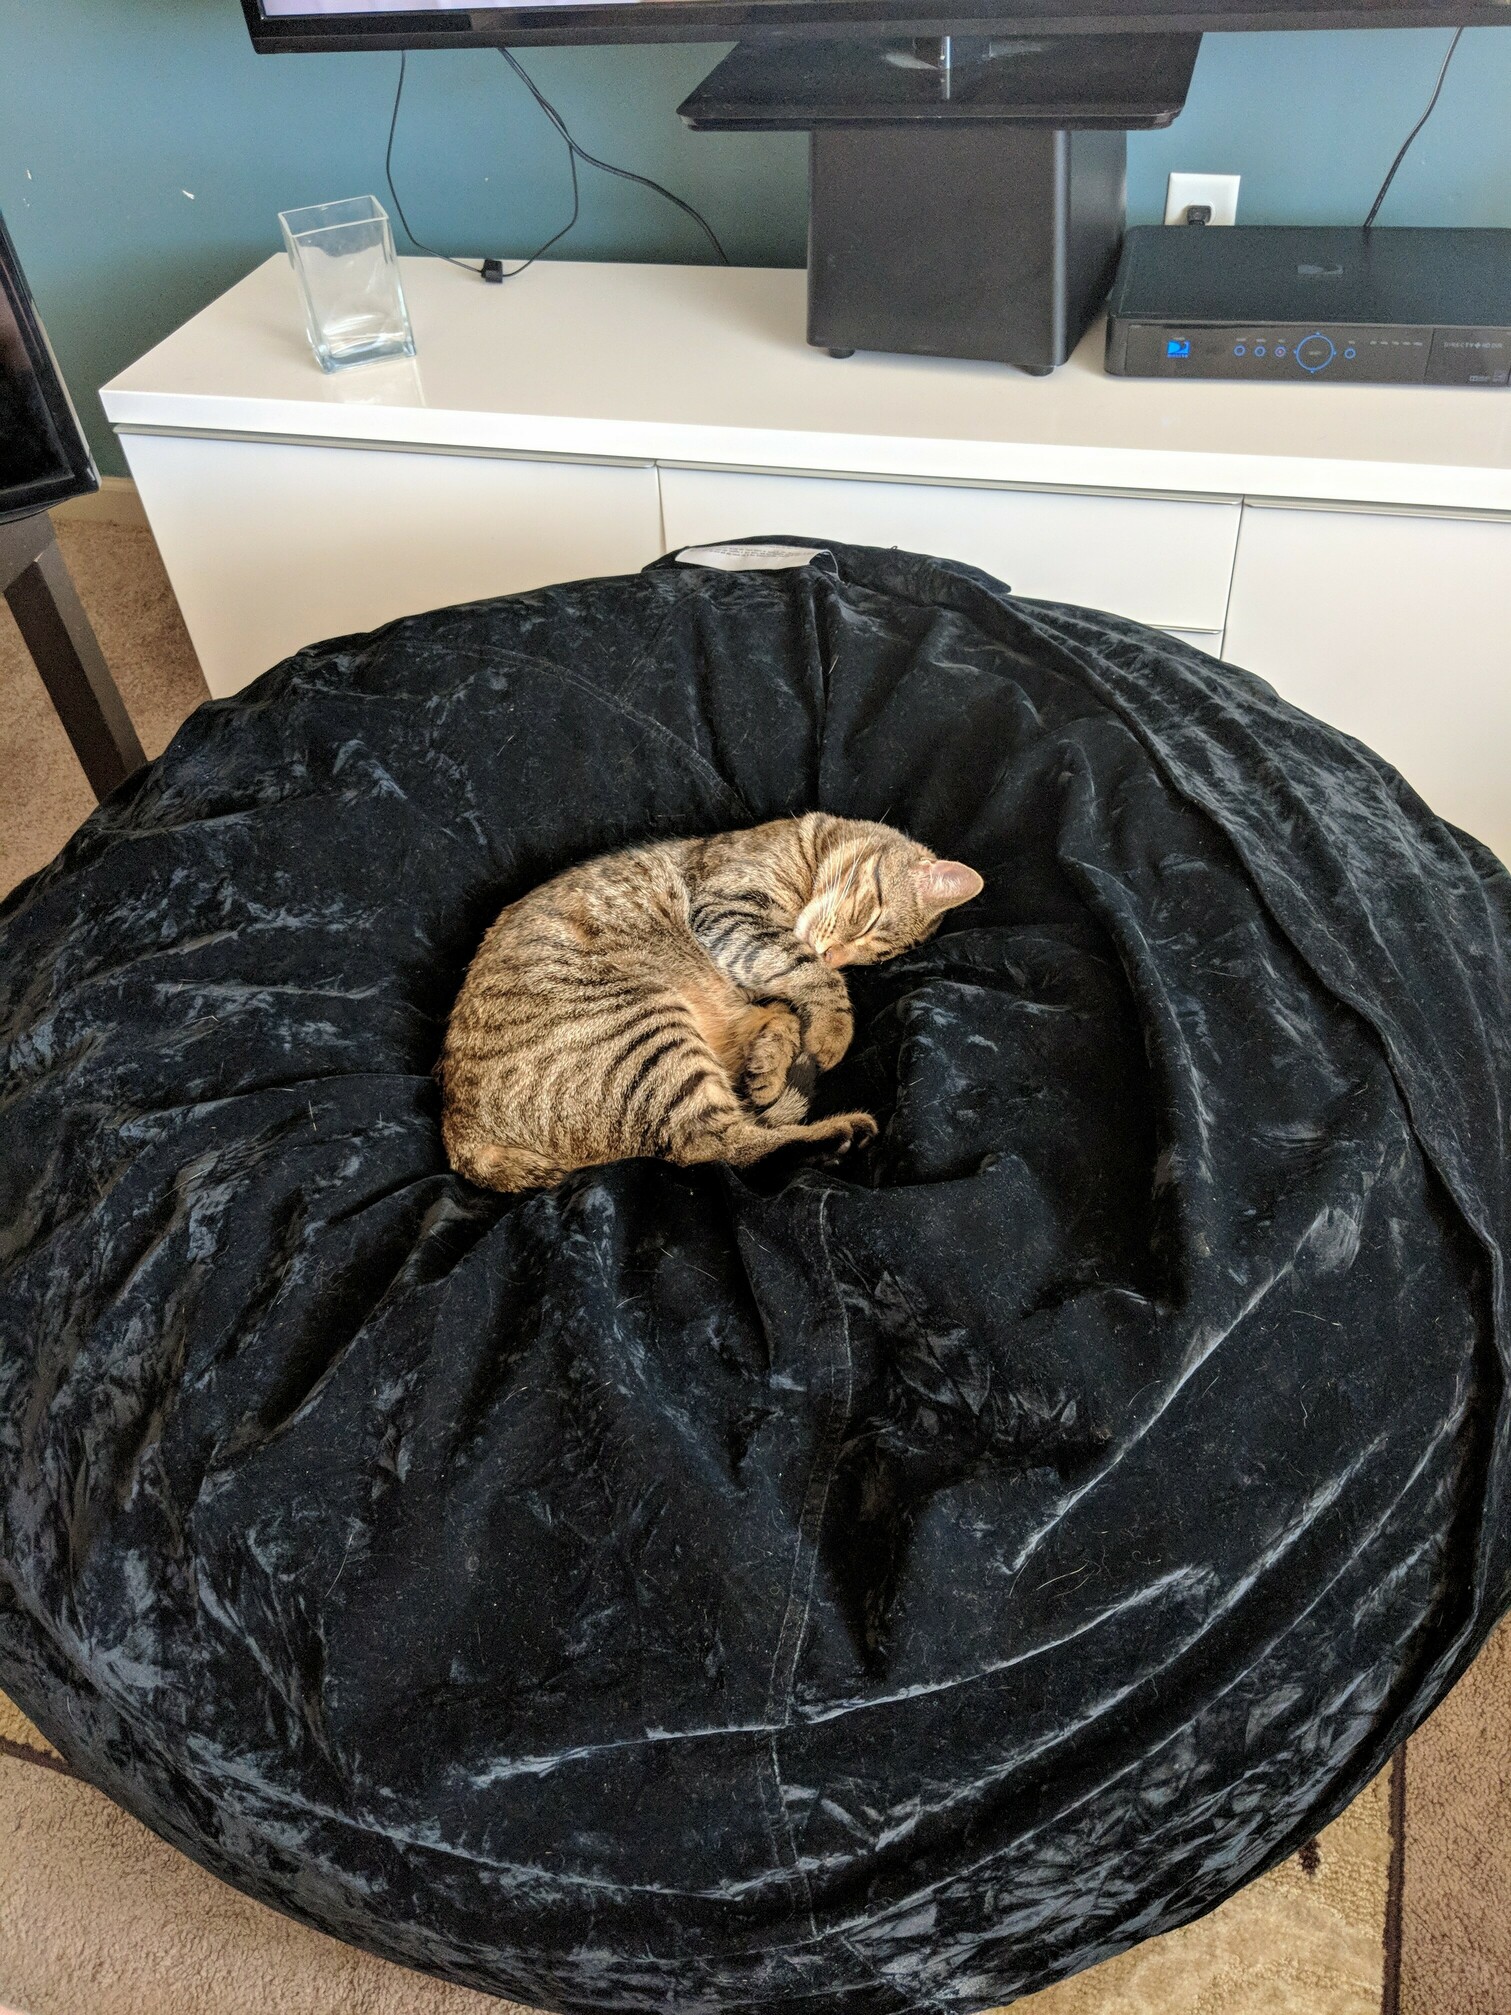 Do you guys this cat bed is big enough for him